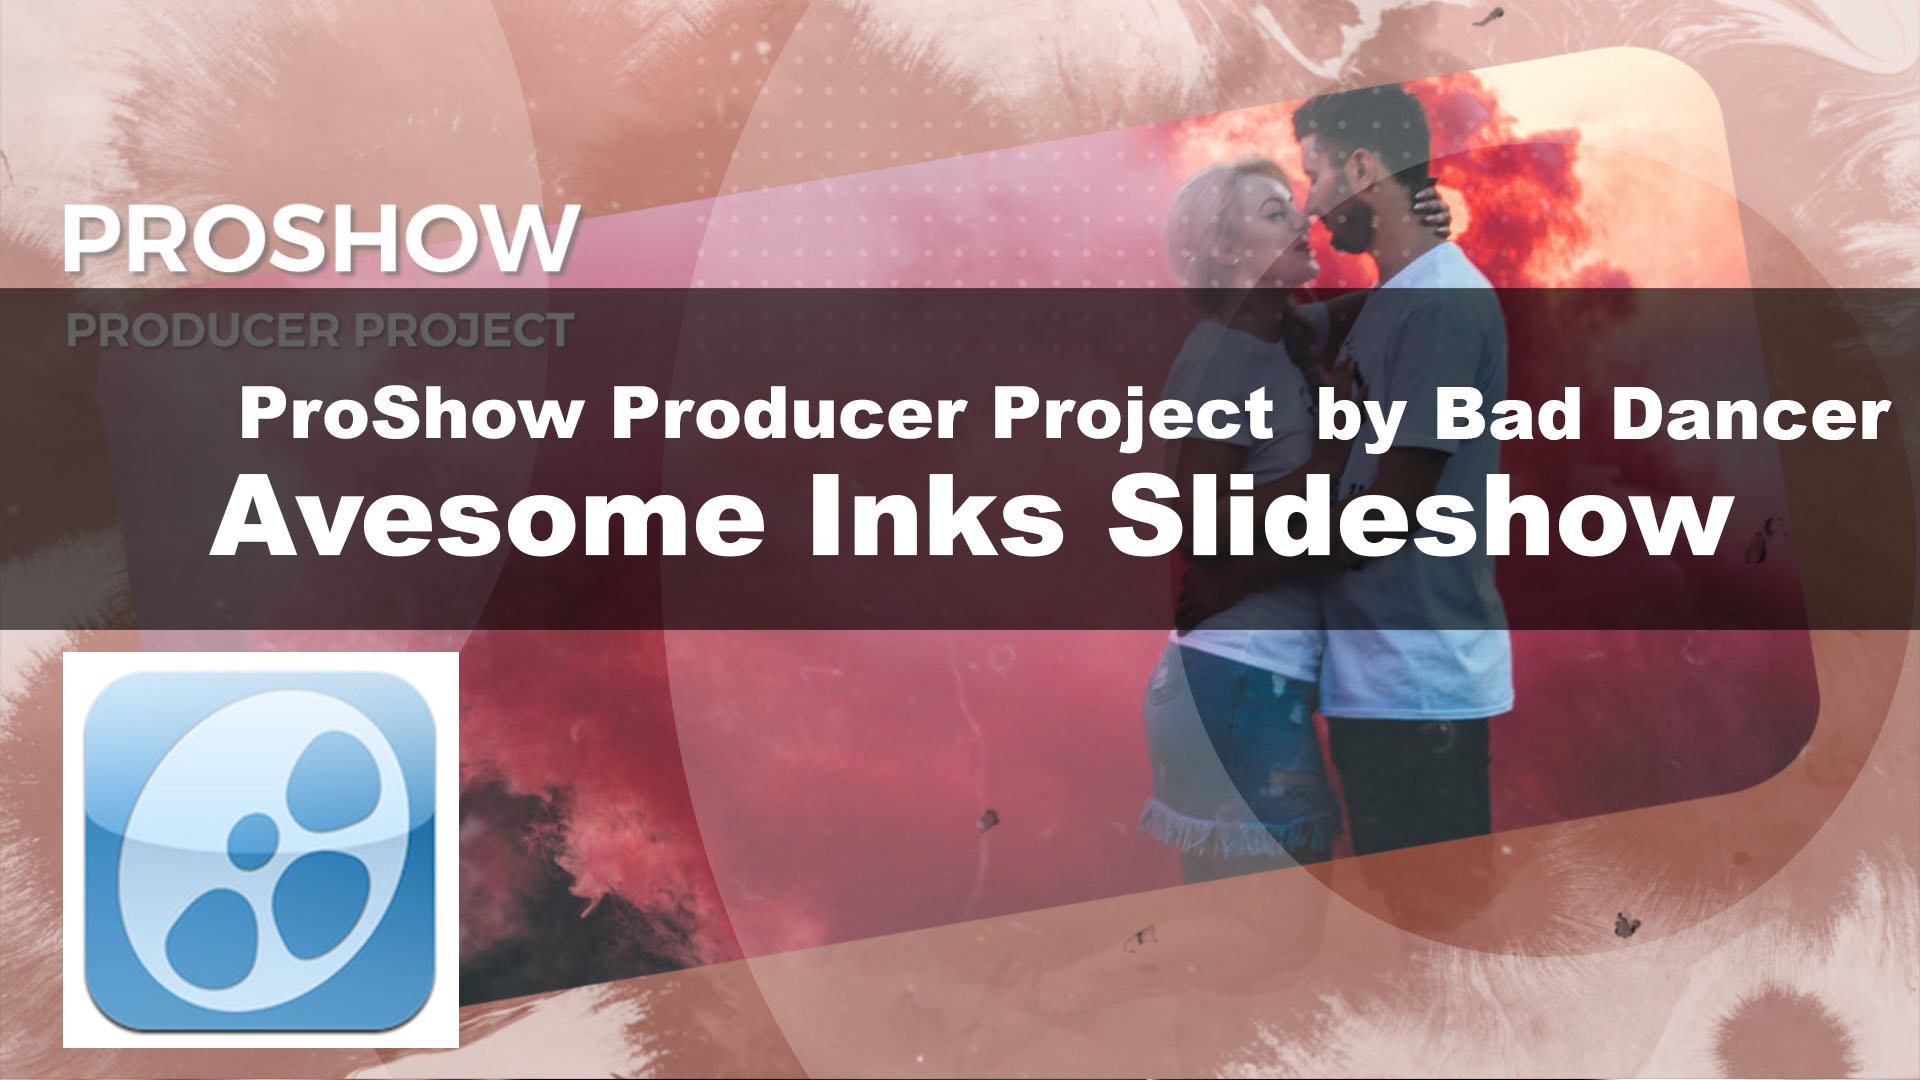 Free Proshow Producer project -  Awesome Inks Slideshow ID 08052021